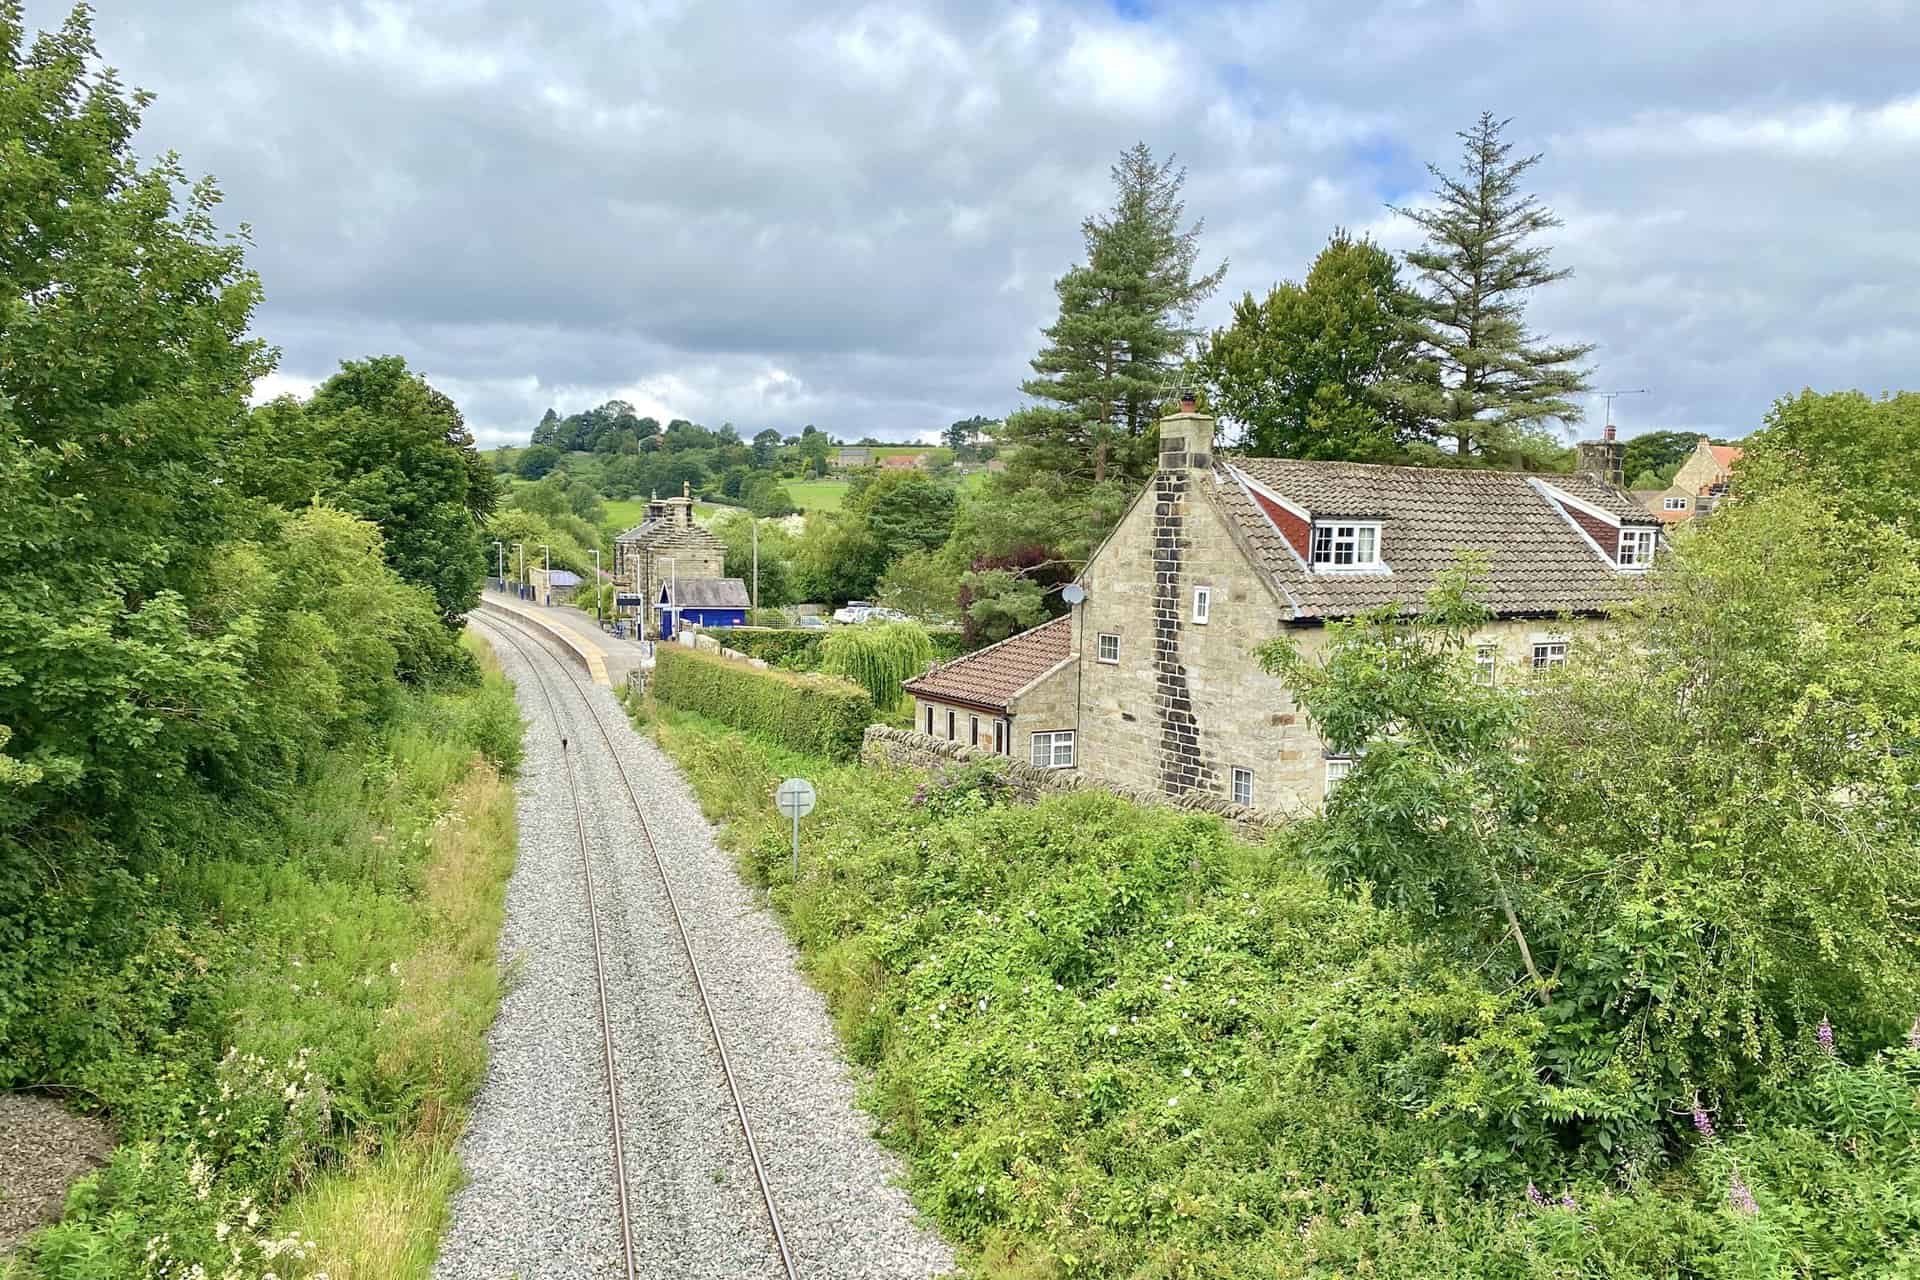 The Esk Valley Railway at Danby.